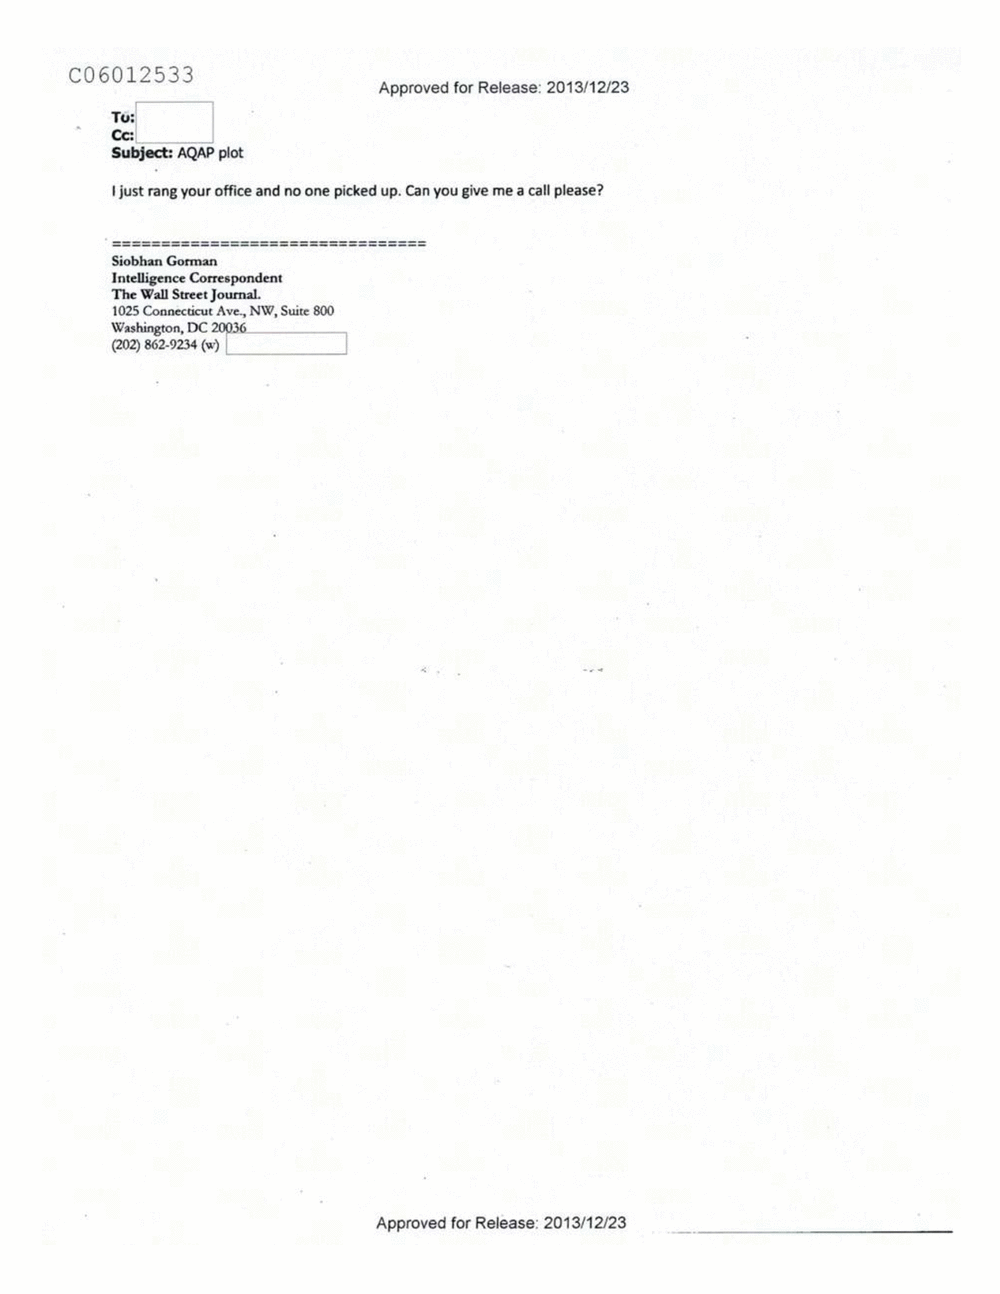 Page 66 from Email Correspondence Between Reporters and CIA Flacks